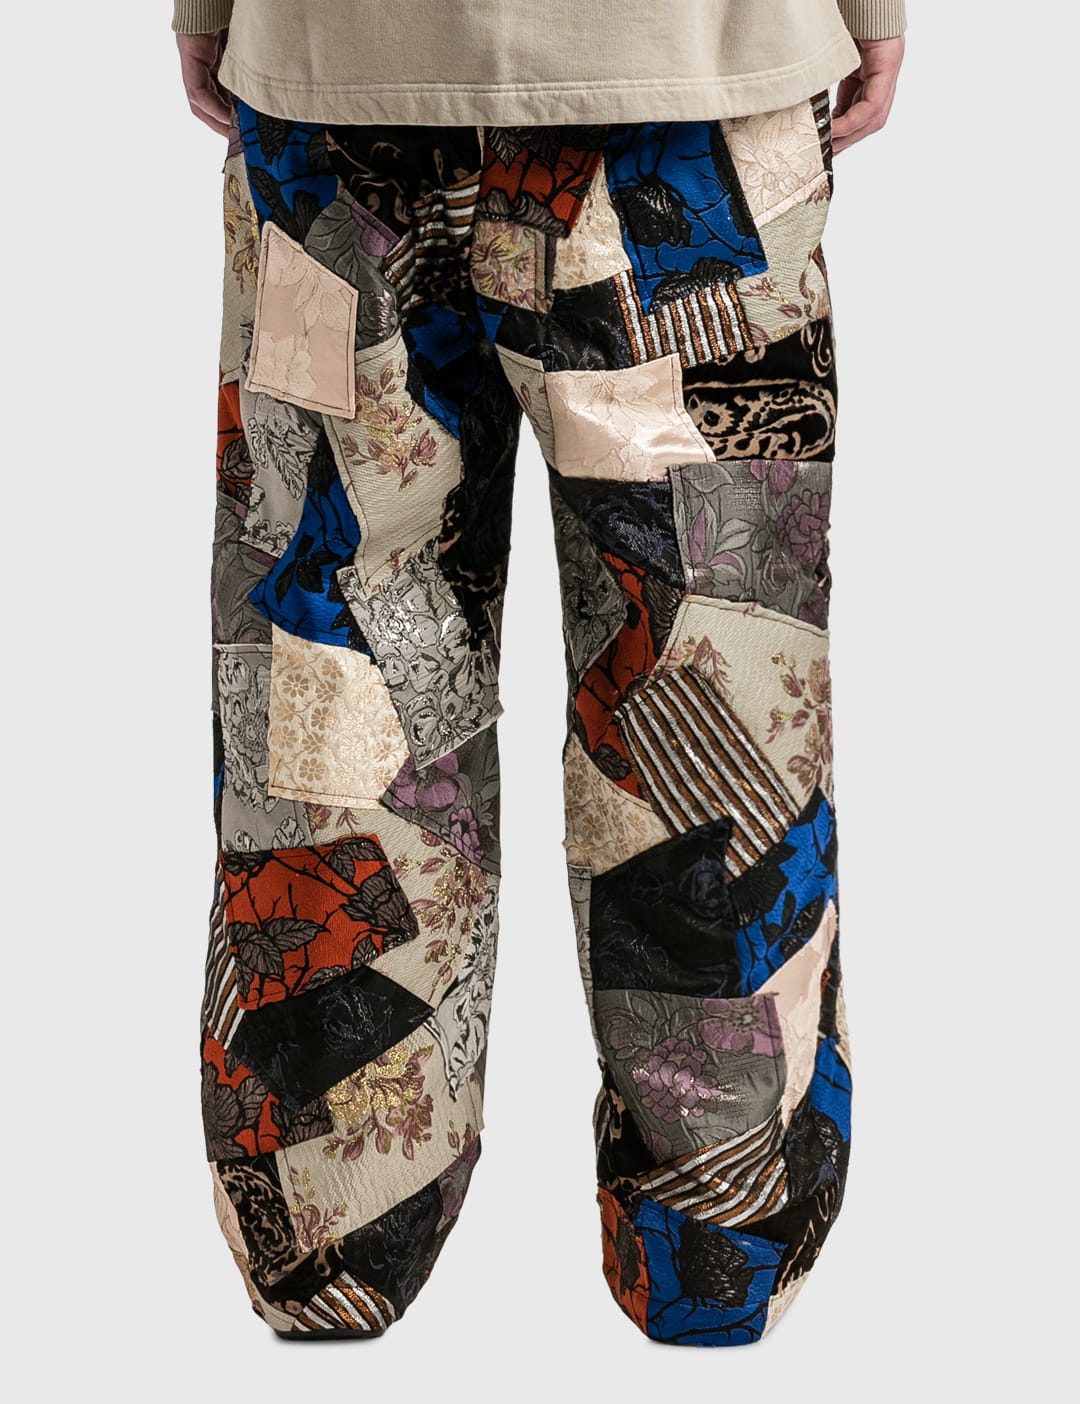 Needles NEW Rebuild by Needles Patchwork Cargo Pants | Grailed